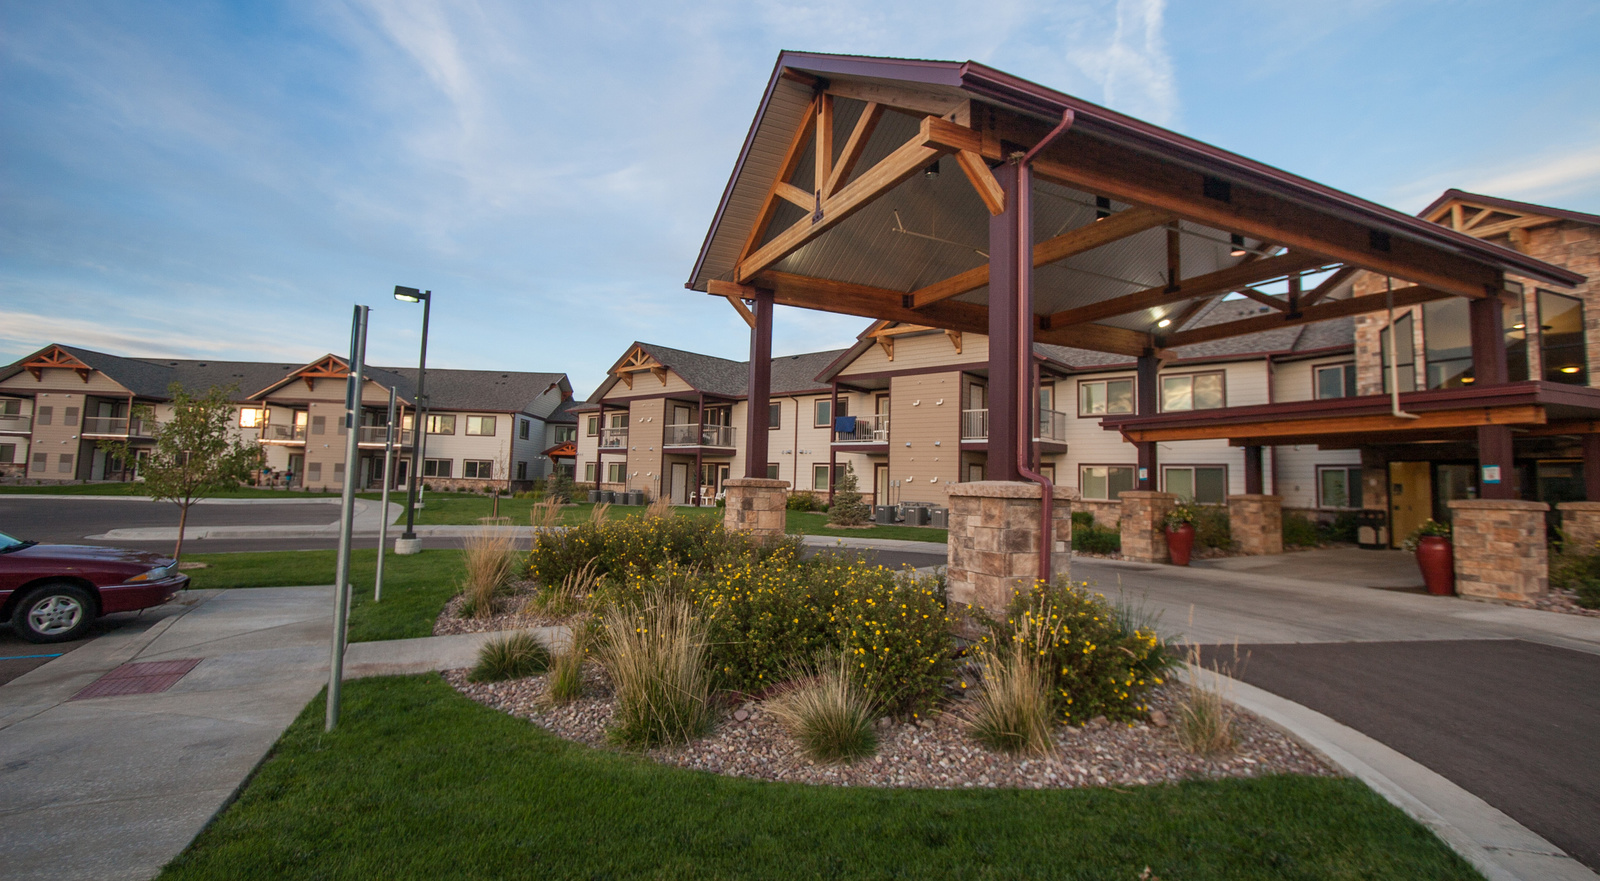 This 56-unit affordable senior housing project is located at 3001 15th Avenue So. on the campus of Benefis Health System in Great Falls, MT. Phase 1 opened September 2012 and Phase 2 opened in August 2016.